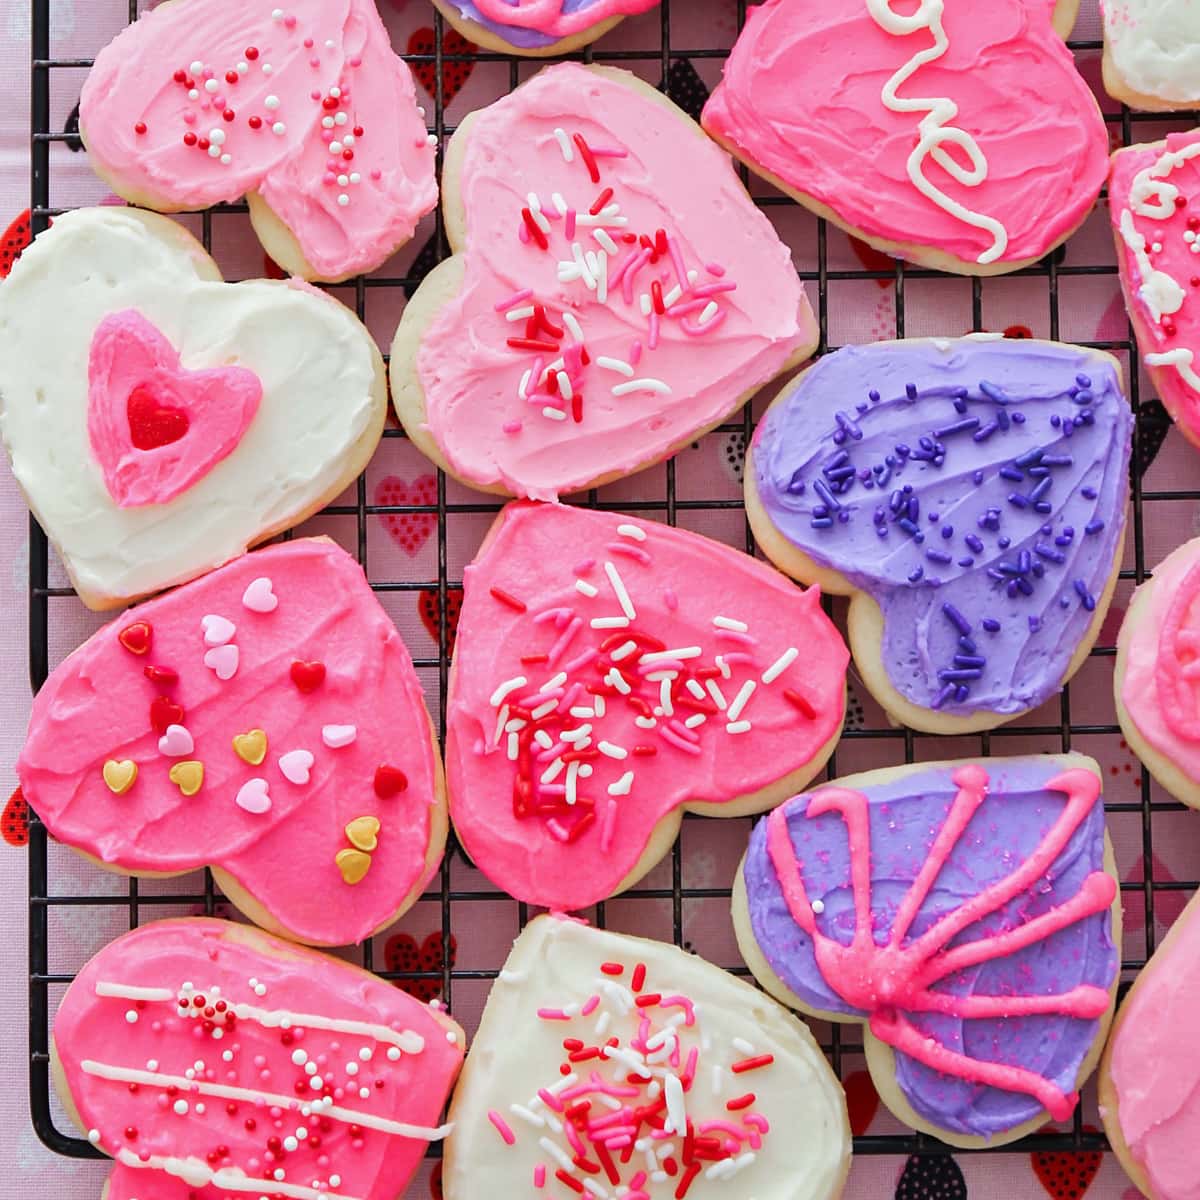 Heart shaped valentine sugar cookies with red and pink frositng